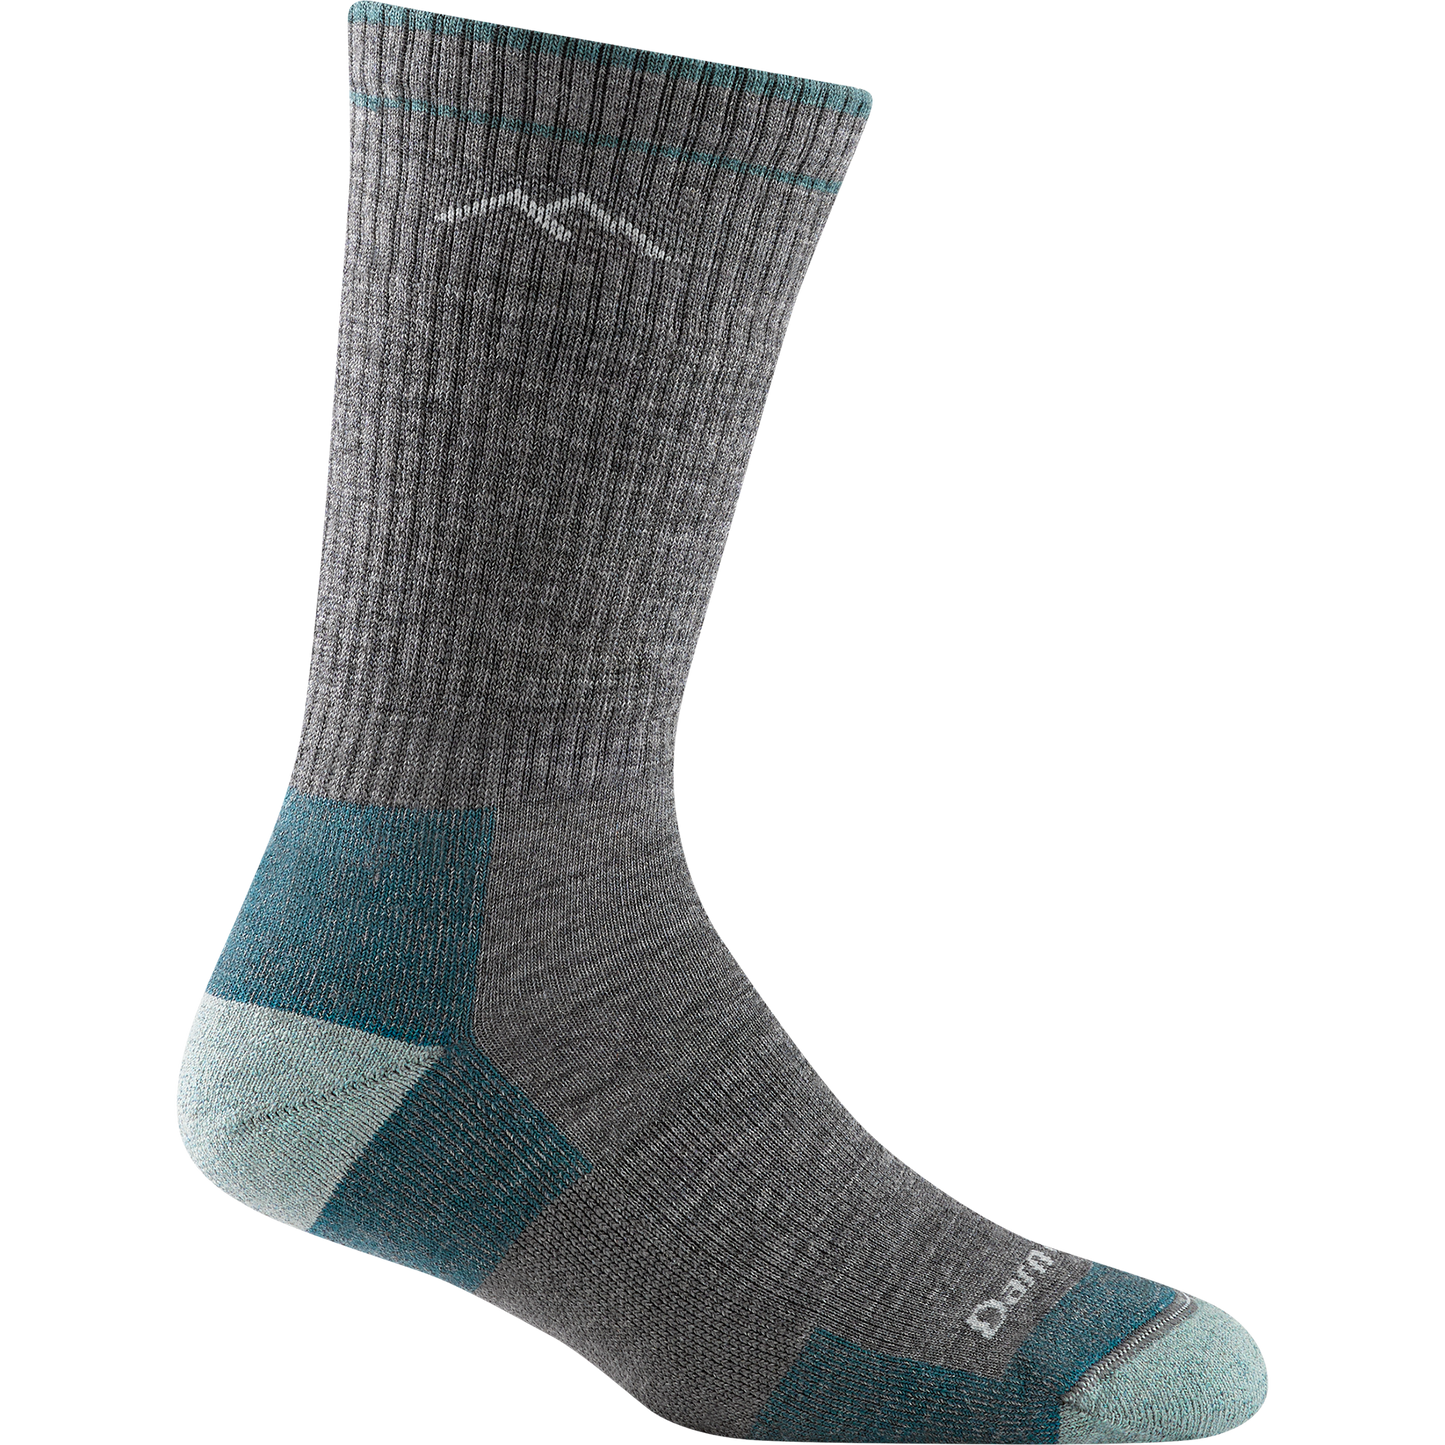 Darn tough grey sock with light gray mountain outline detail, light blue toe and heel